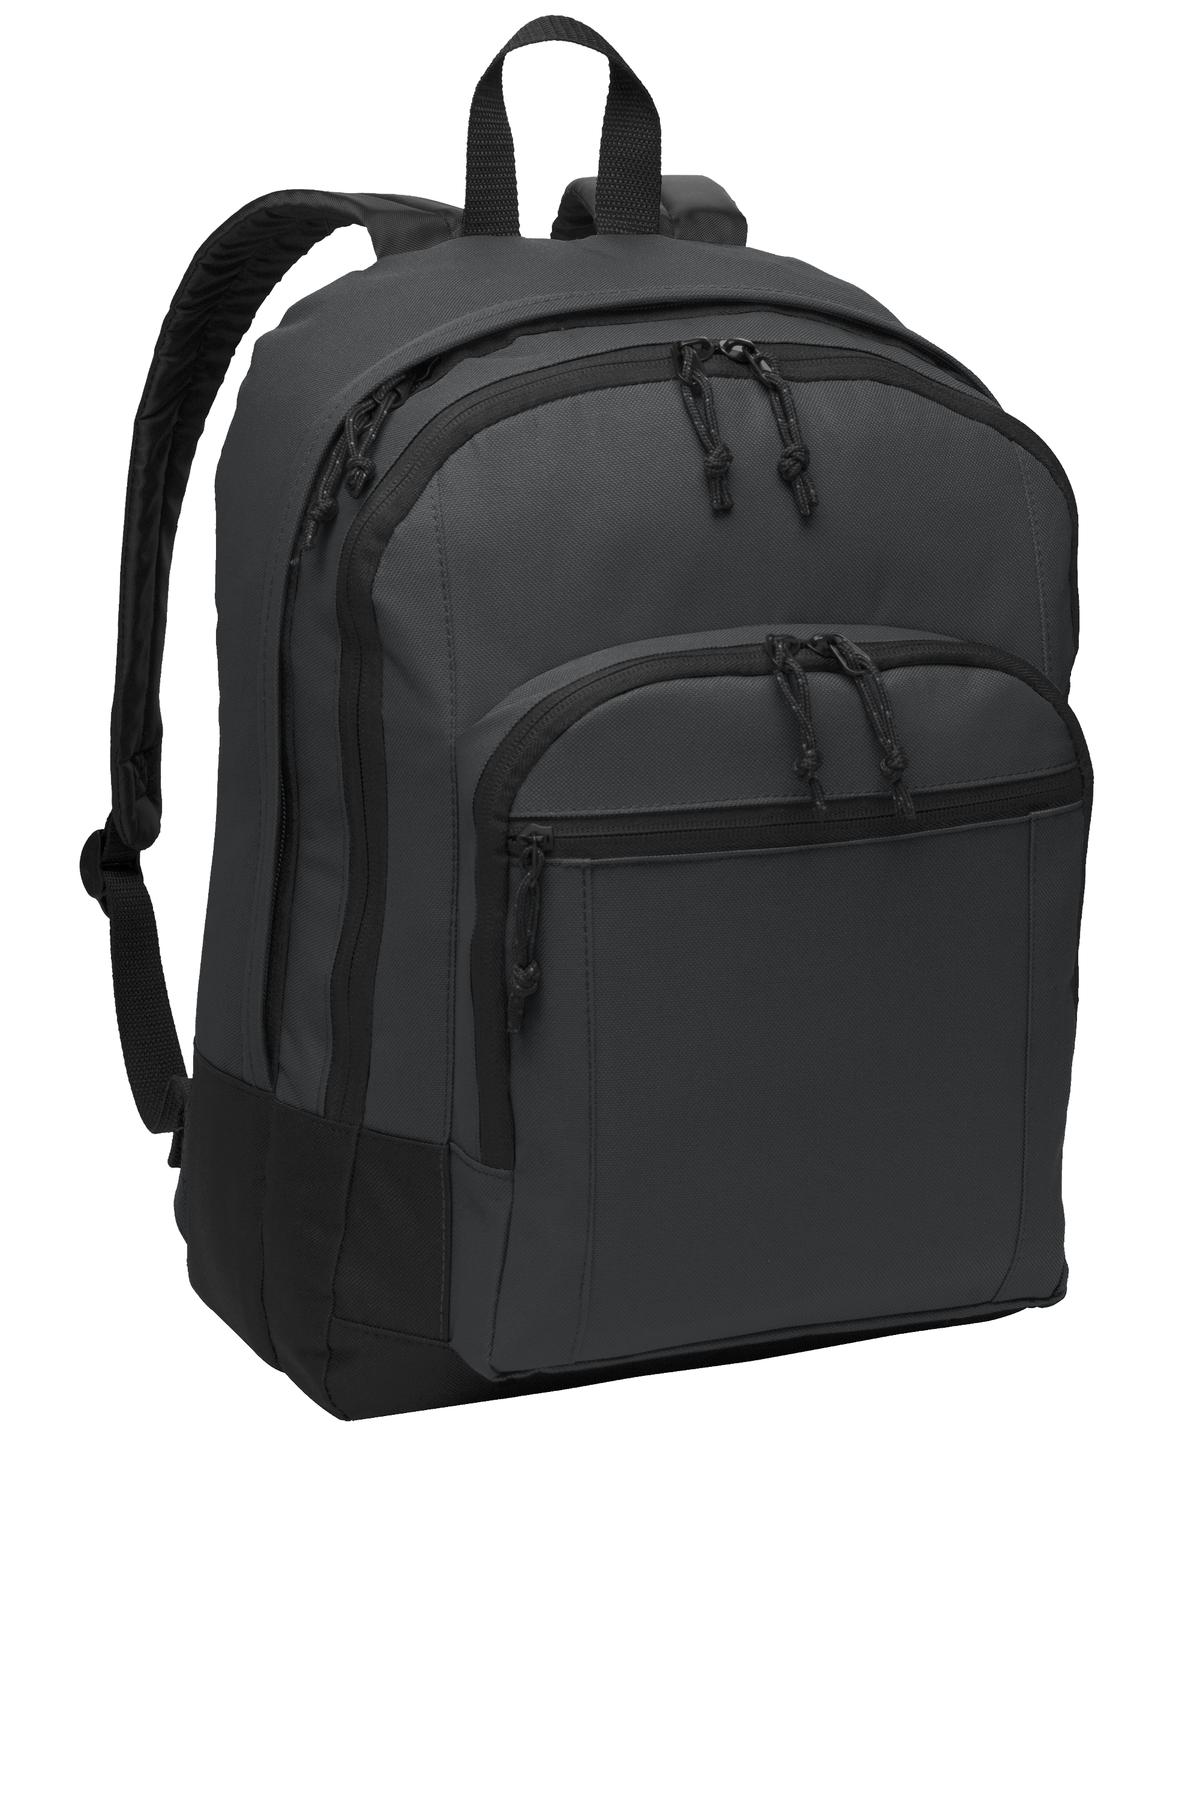 Photo of Port Authority Bags BG204  color  Dark Charcoal